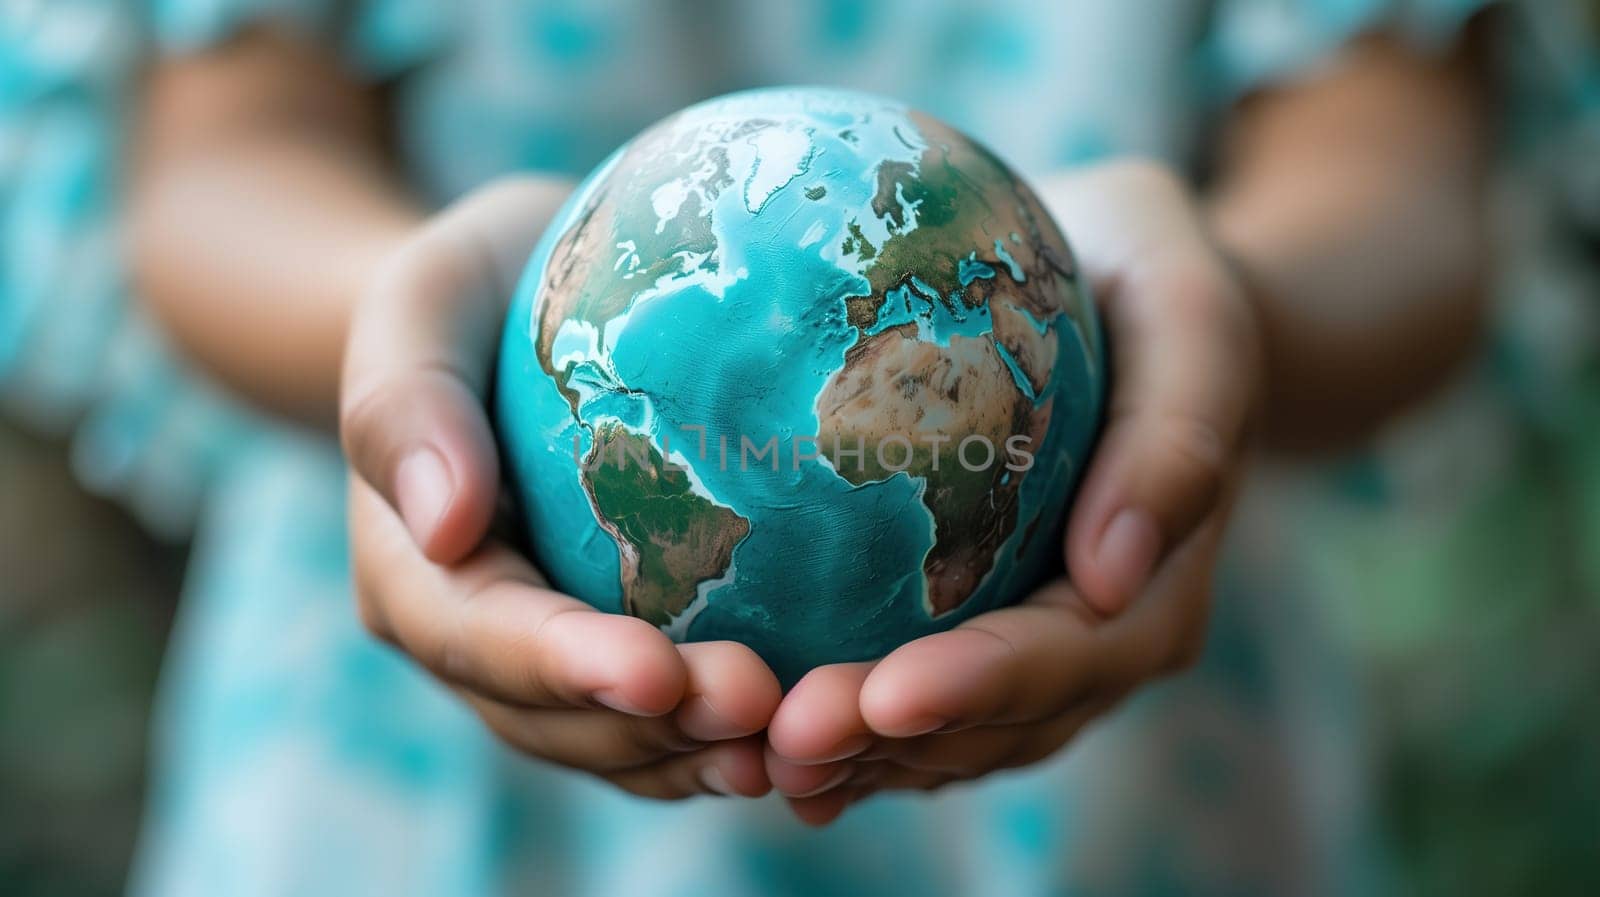 A person is holding a small globe in their hands, looking at it intently. The globe is detailed with continents and oceans, and the persons hands are gently cradling it.